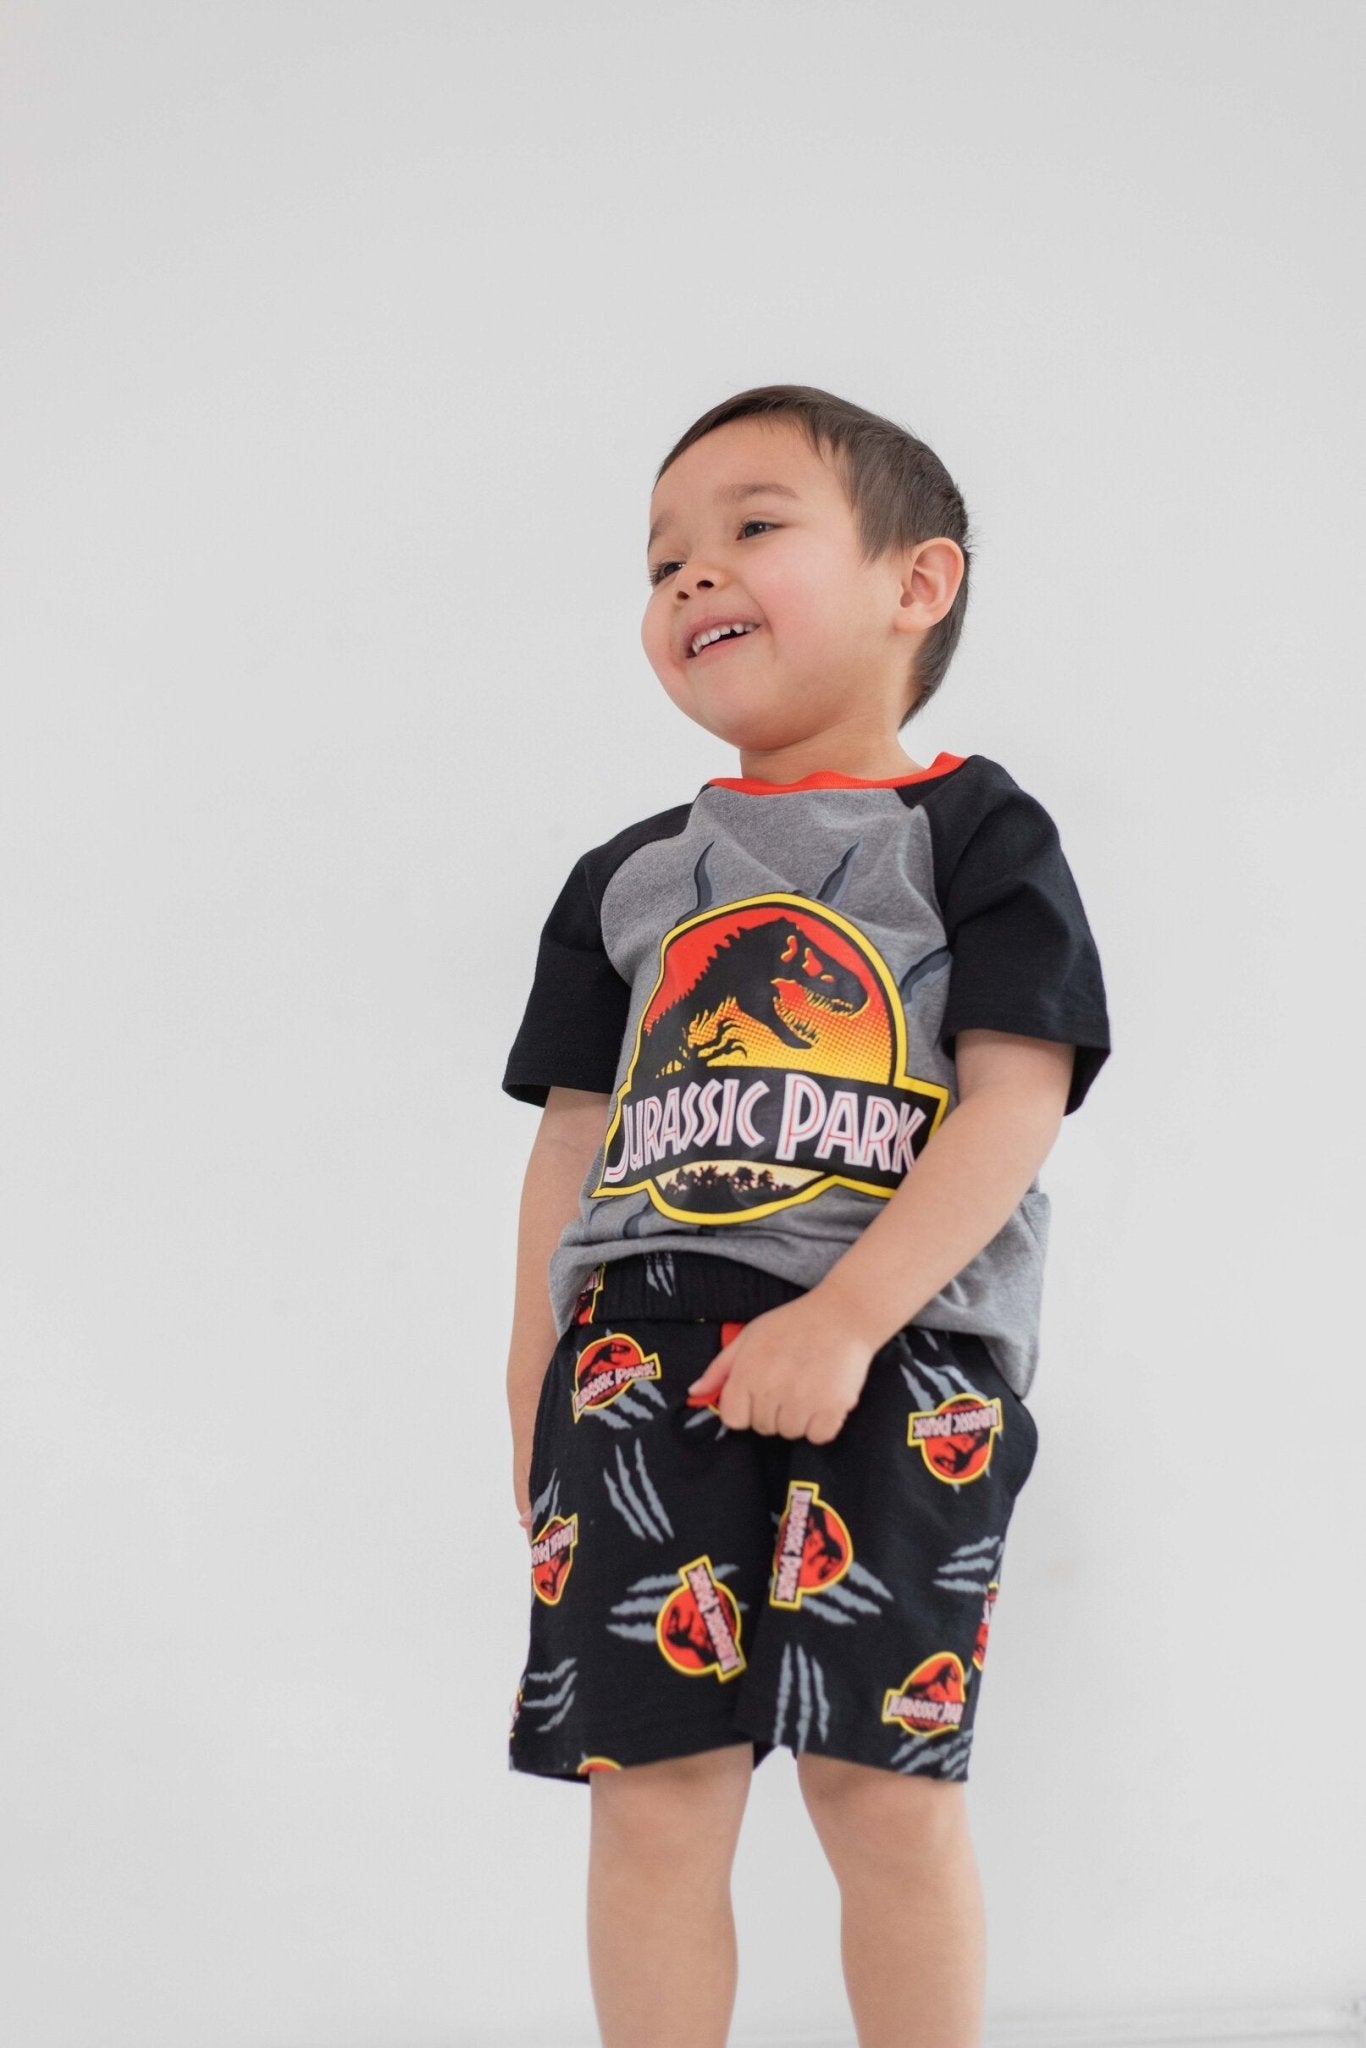 Jurassic World Jurassic Park T-Shirt and French Terry Shorts Outfit Set - imagikids